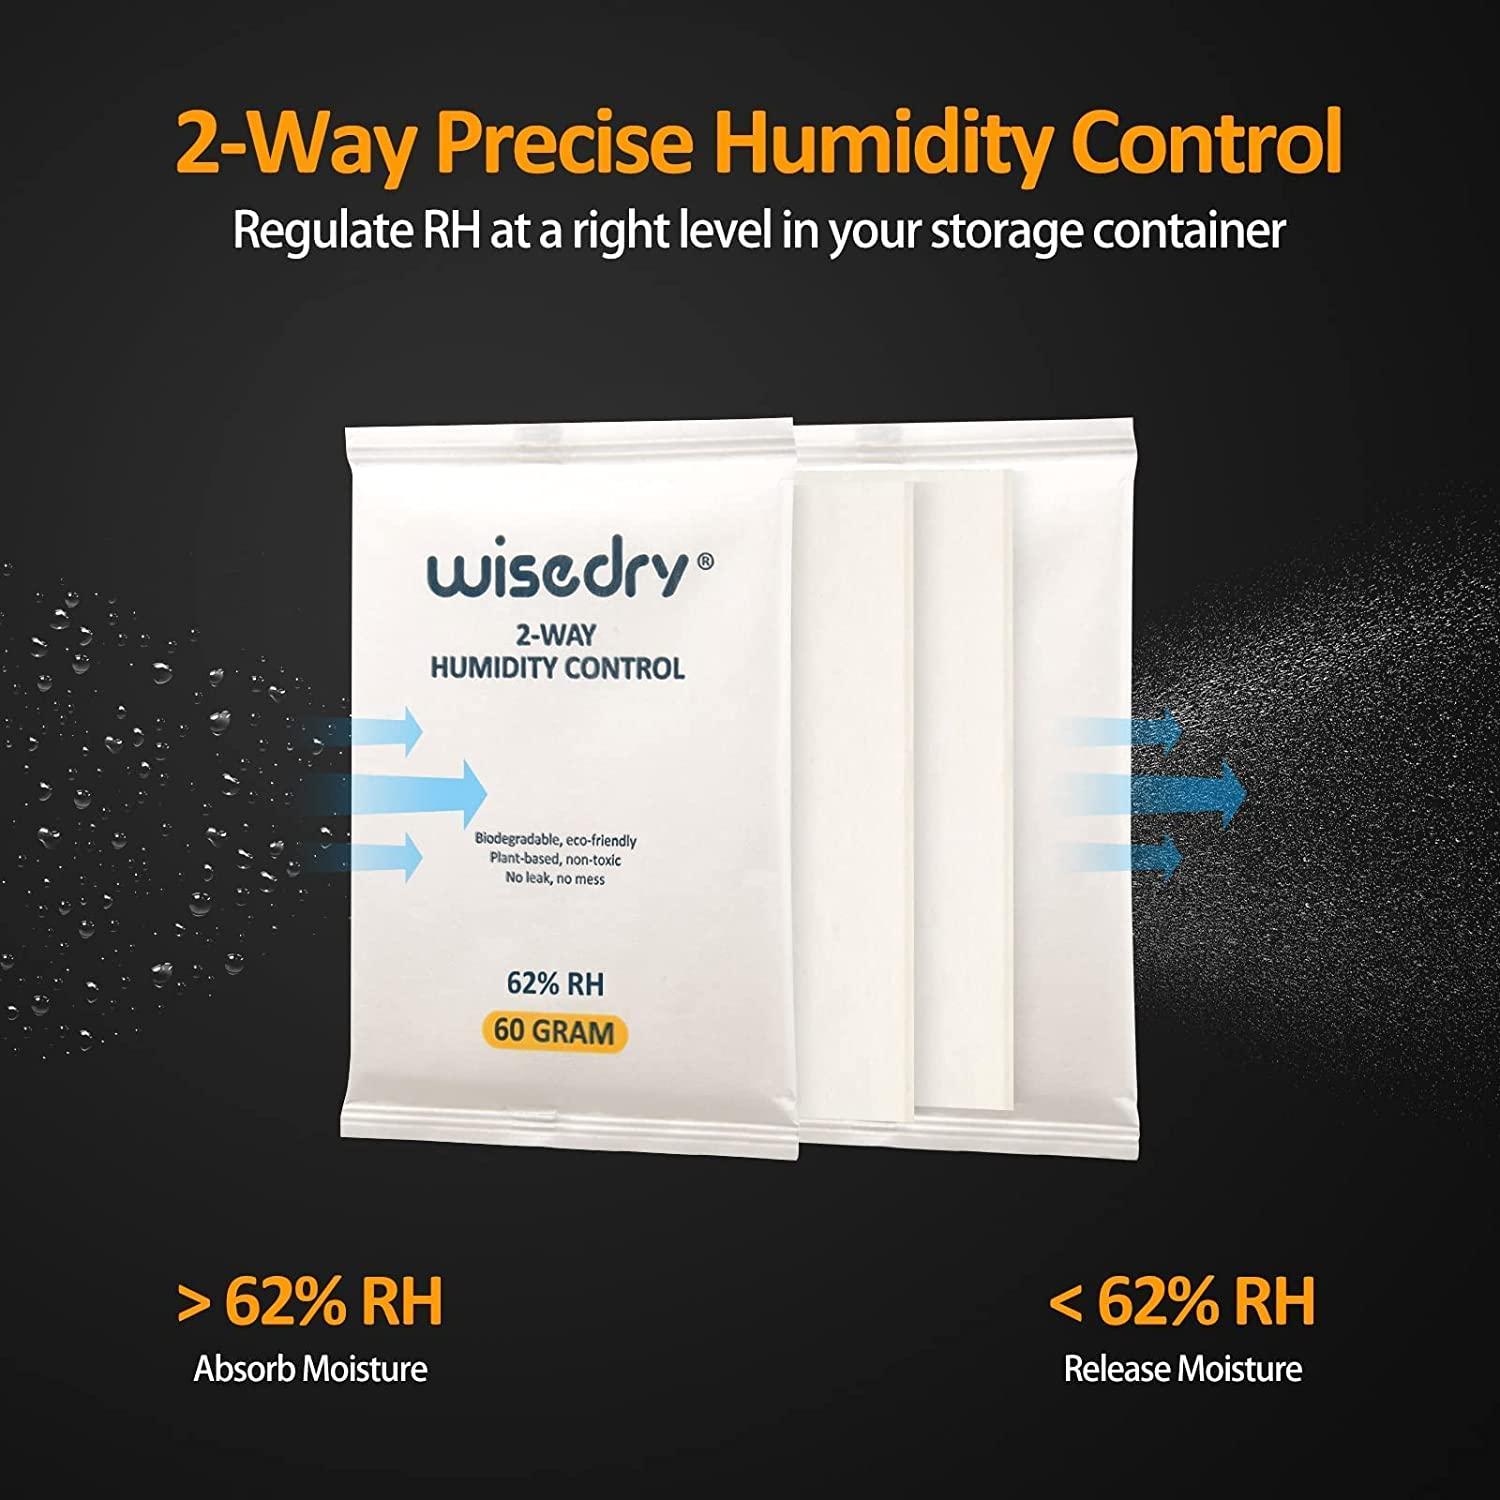 wisedry 62 Humidity Packs - 4 Pcs 60 Gram Two Way Moisture Control